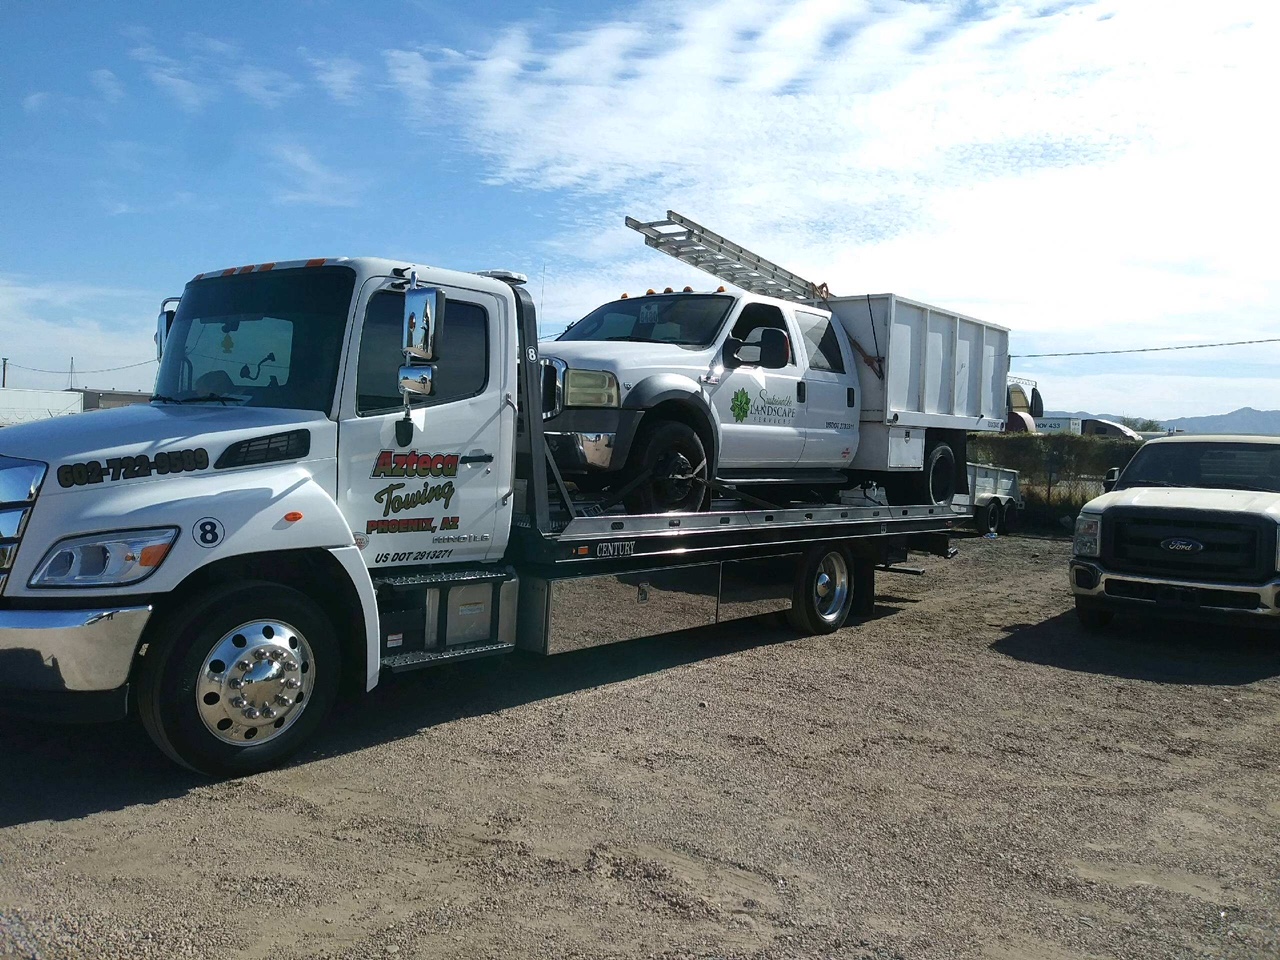 Does the towing company provide additional roadside assistance?